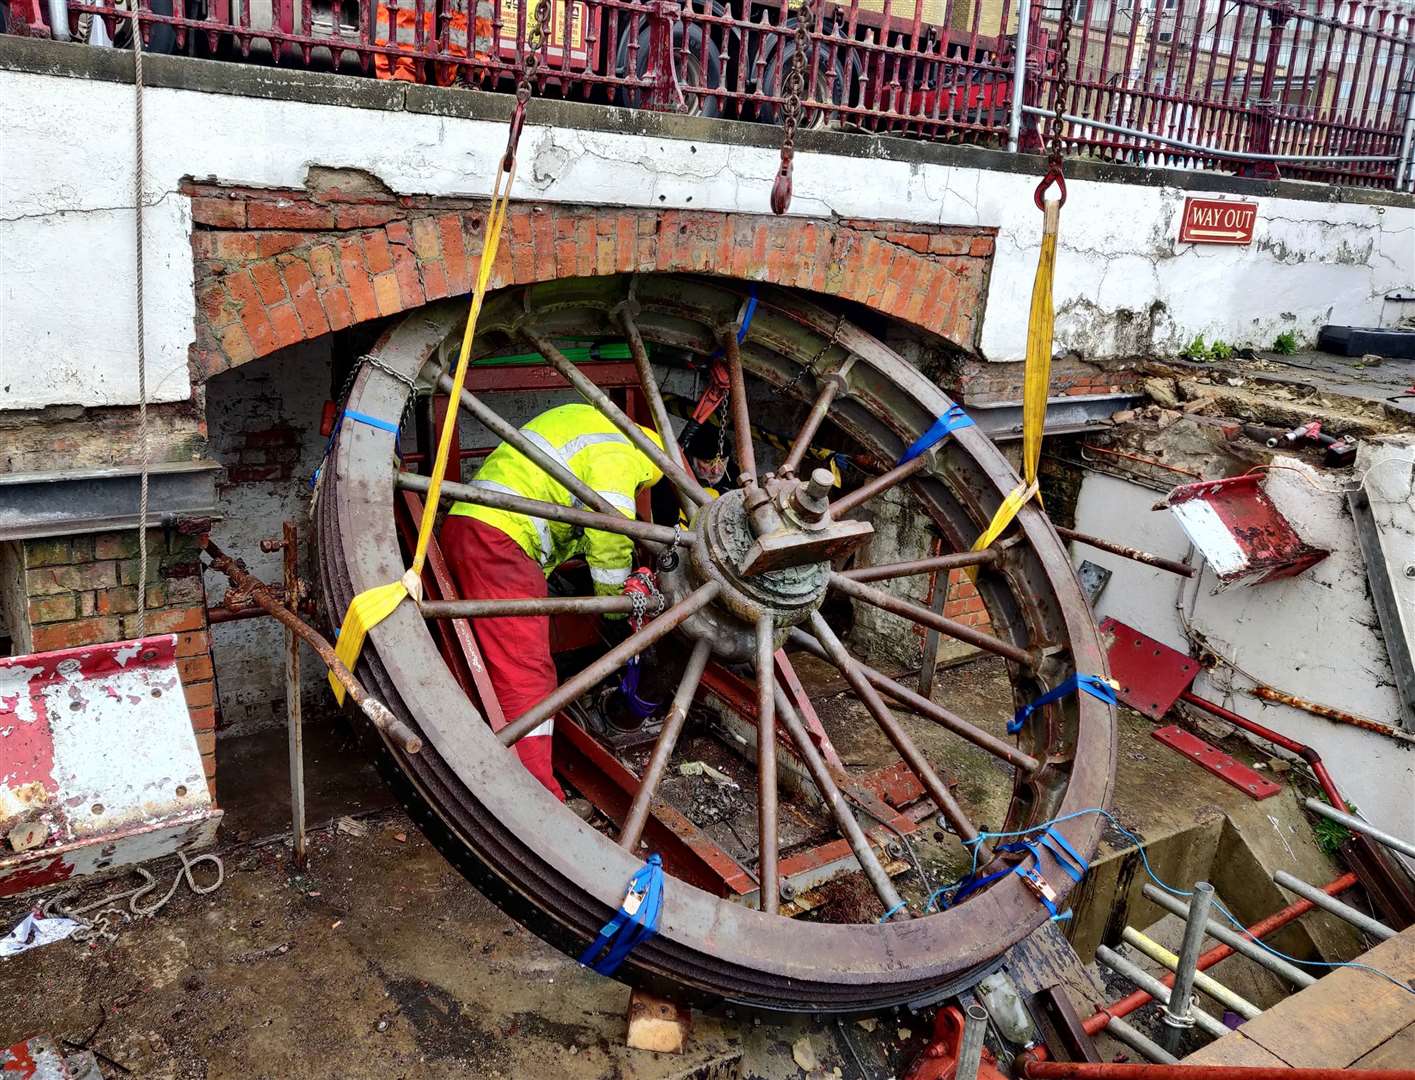 The sheave wheel is vital to the Leas Lift in lowering and raising the passenger cars. Picture: Folkestone Leas Lift Company Charity